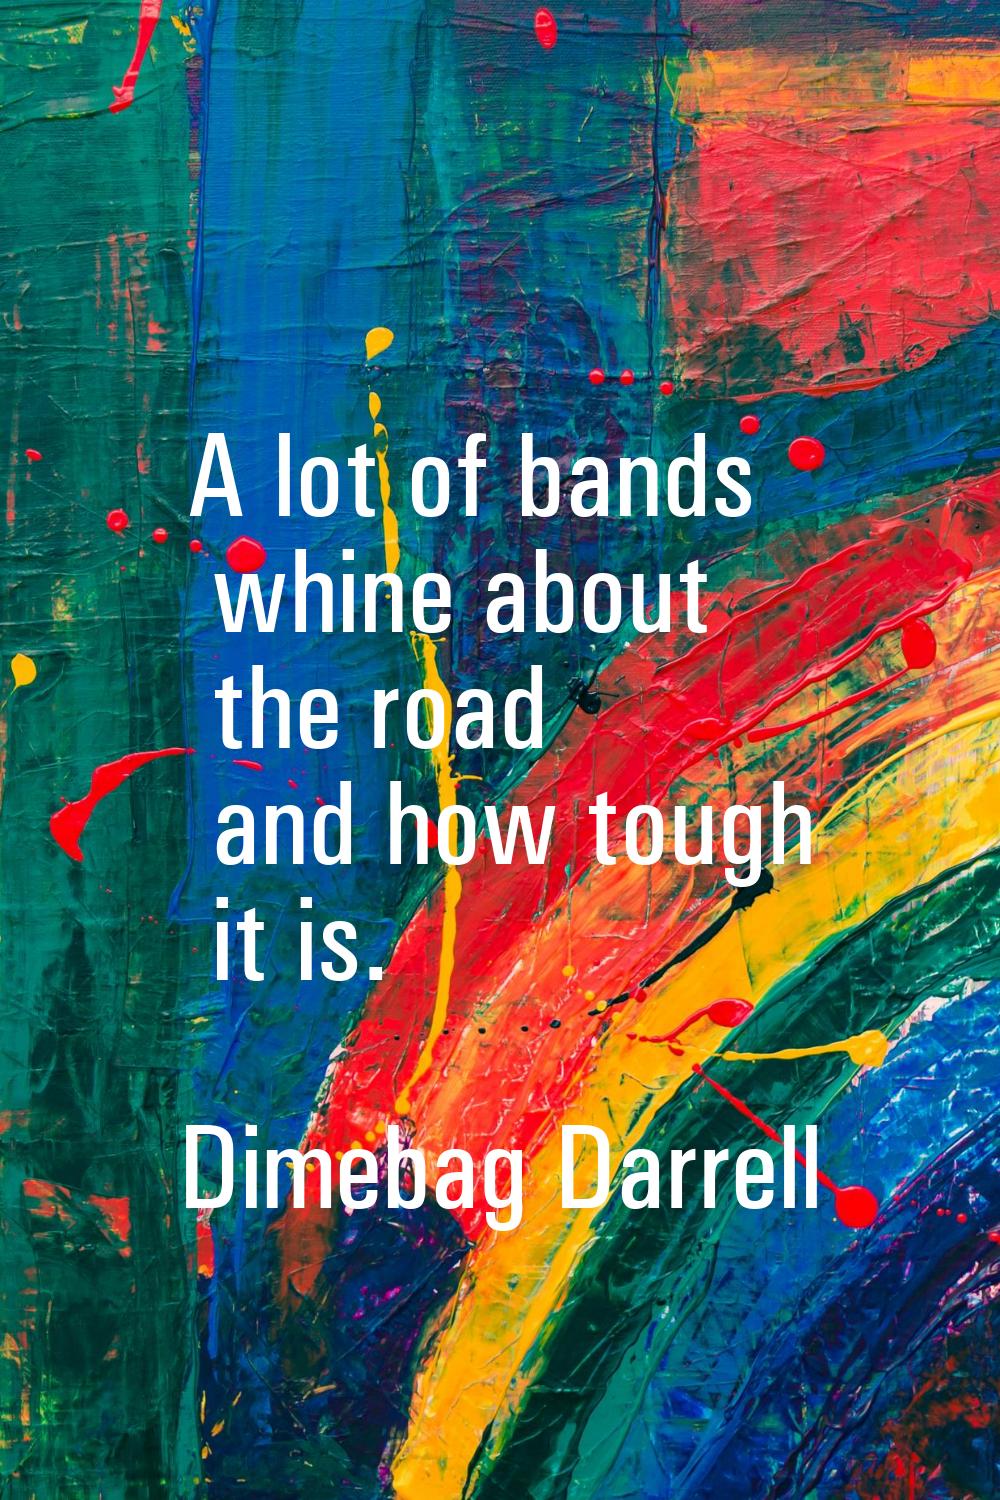 A lot of bands whine about the road and how tough it is.